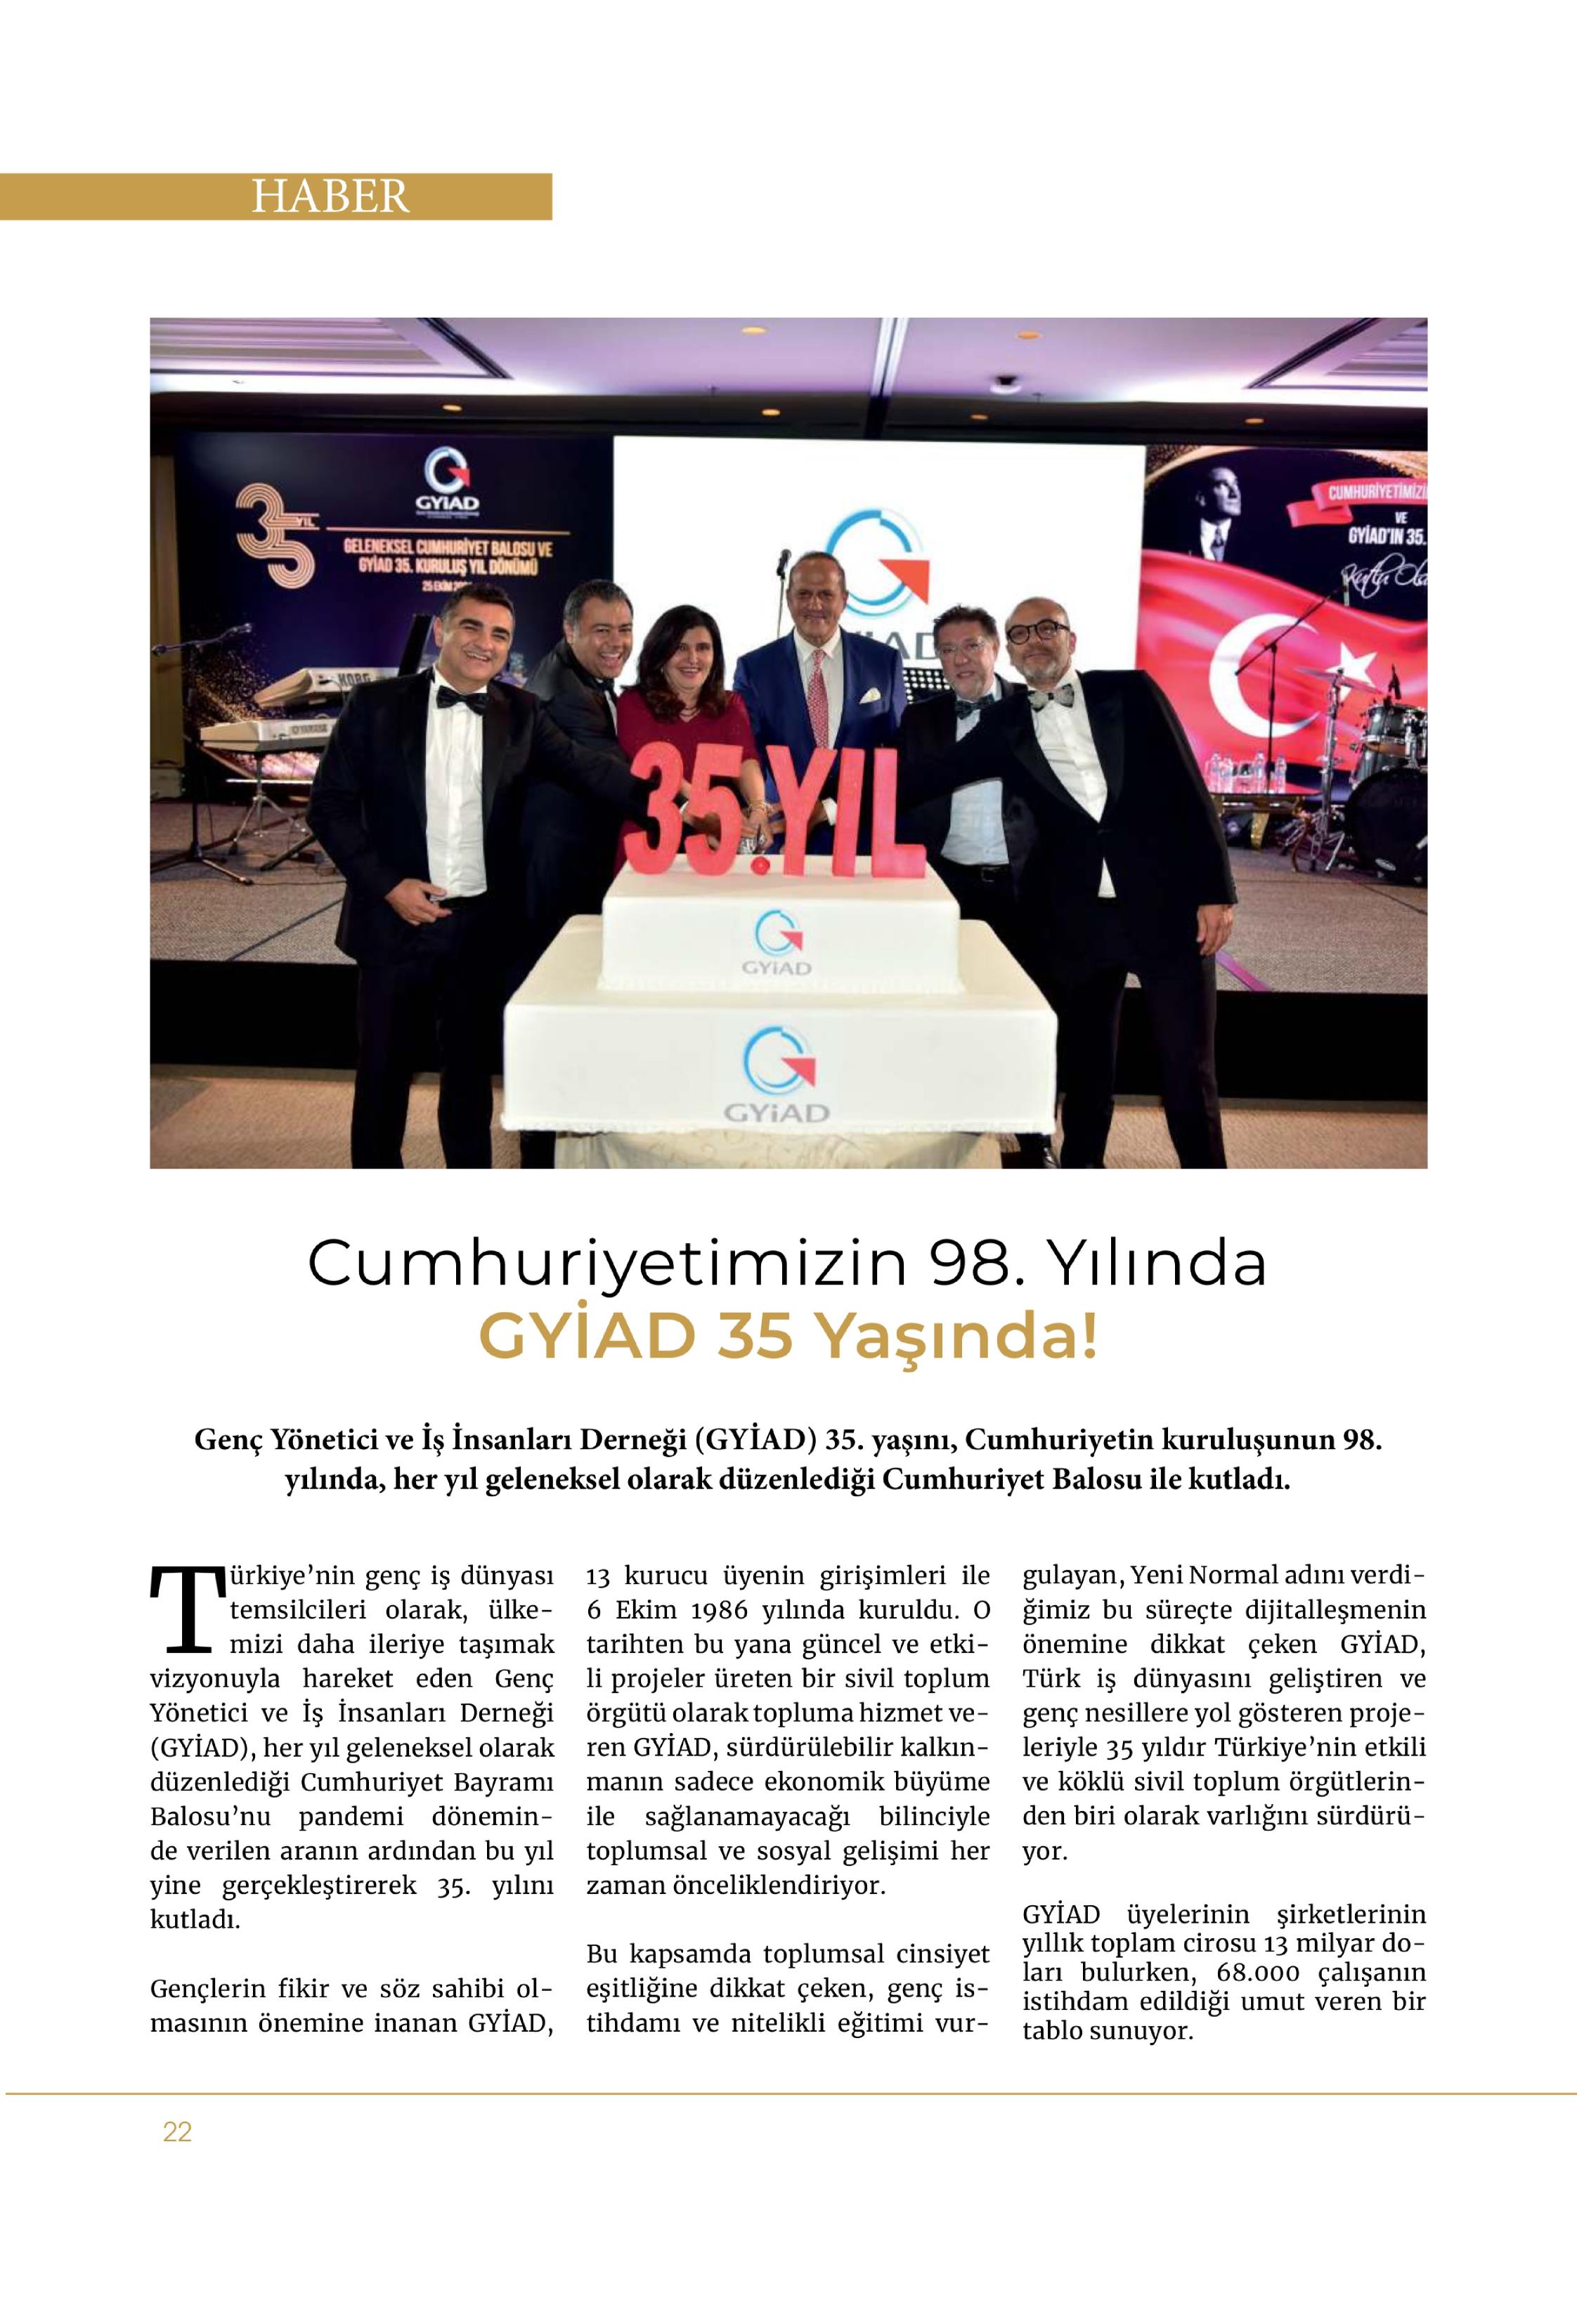 In the 98th Anniversary of our Republic, GYİAD is 35 Years Old!